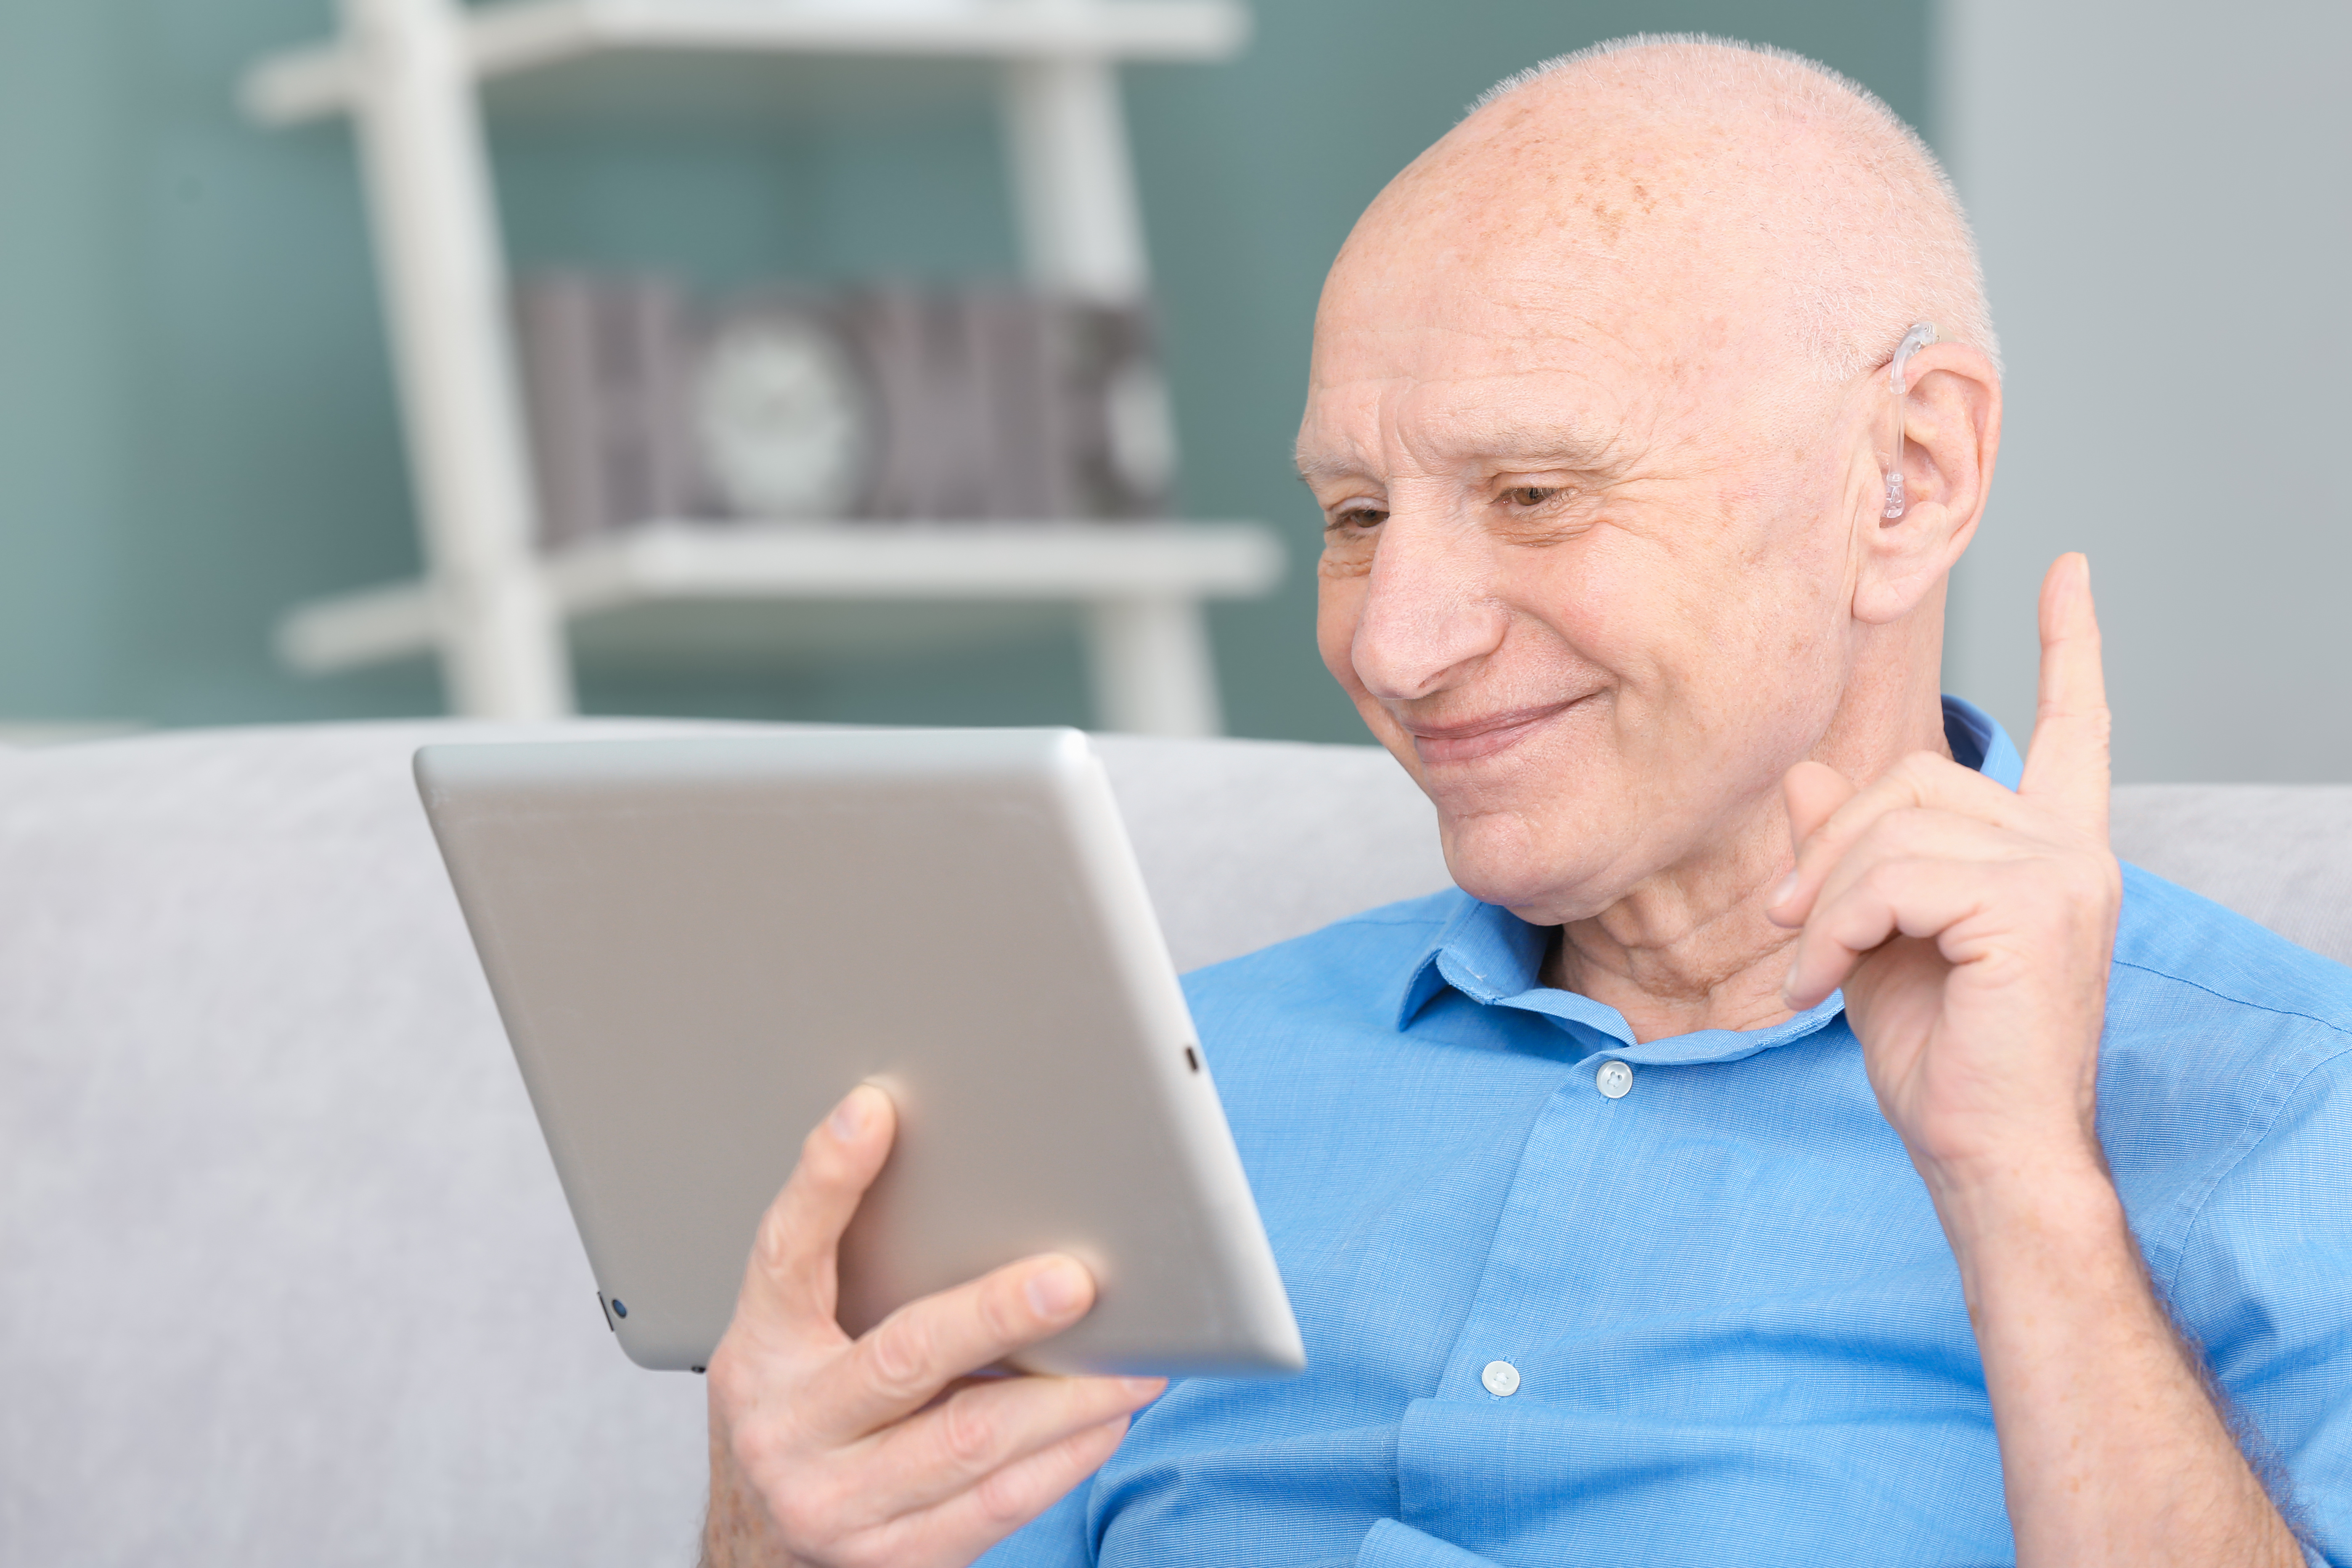 "An older man in a blue shirt with a hearing aid smiles as he looks into an iPad screen and holds up his index finger"